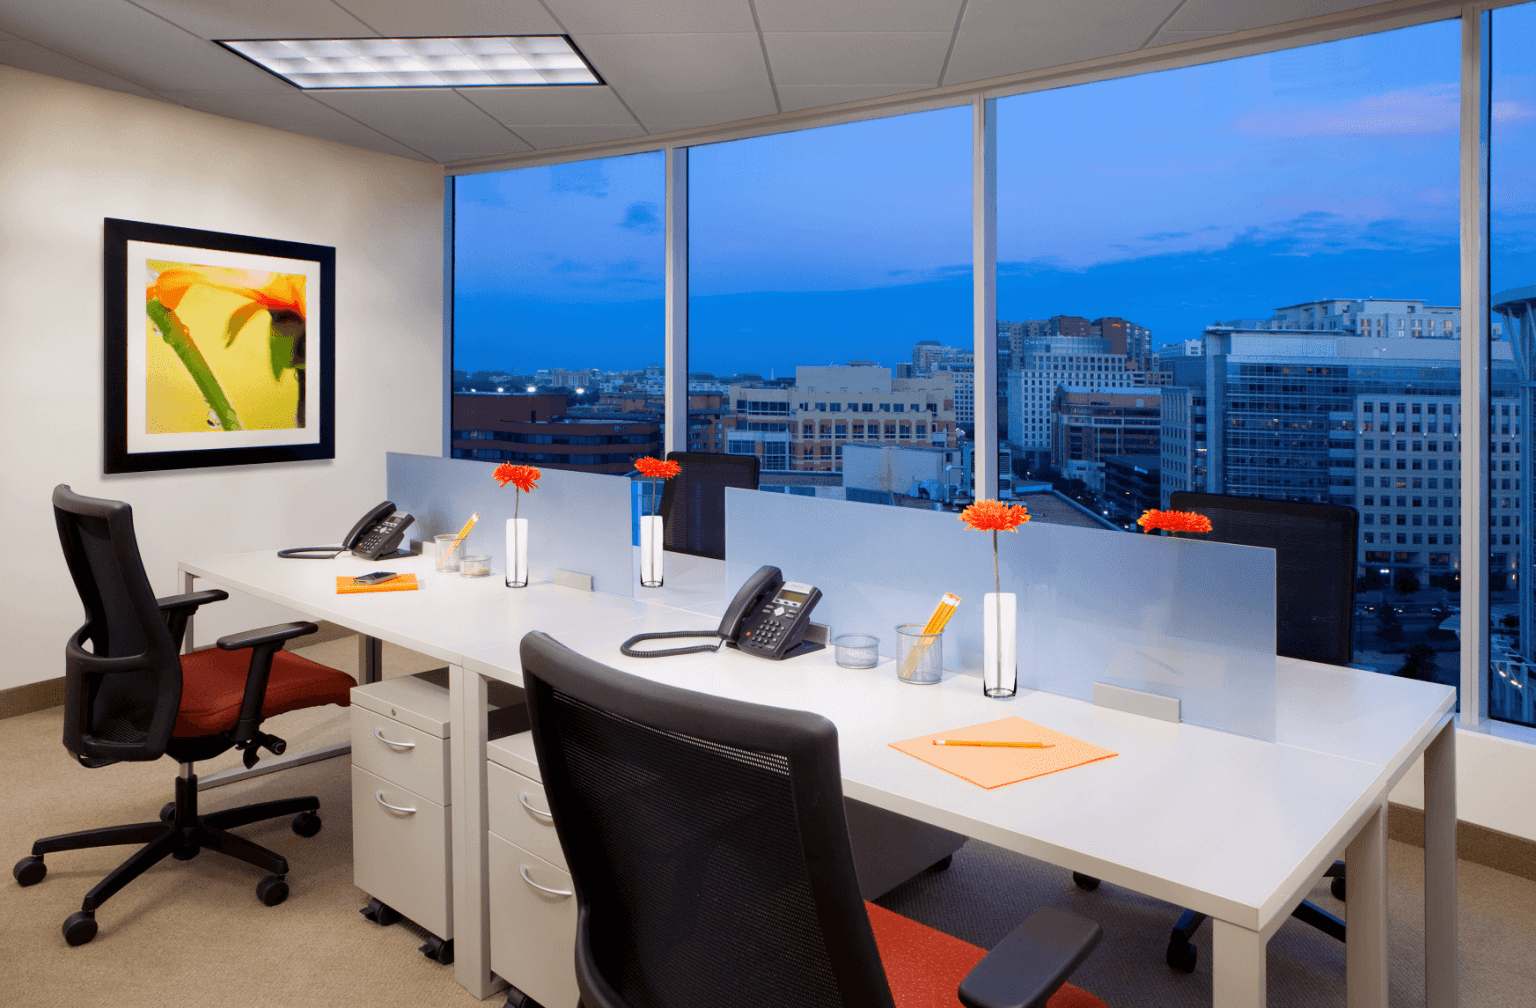 How to “Green” Your Office Space